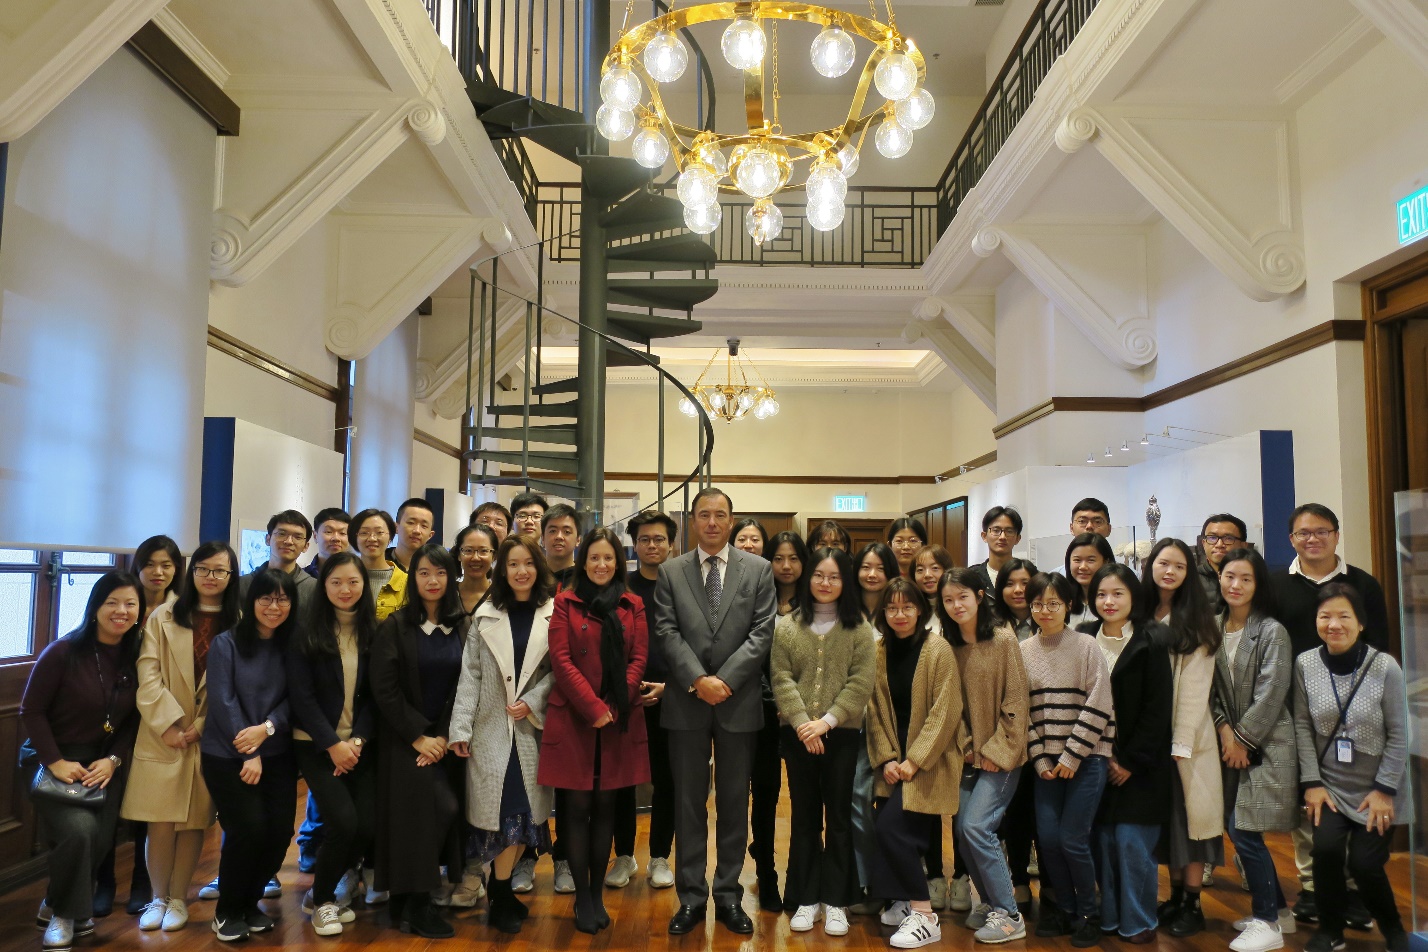 University students joining the school guided visit to the Court of Final Appeal take photo with the Hon Mr Justice FOK, Permanent Judge of the Court of Final Appeal